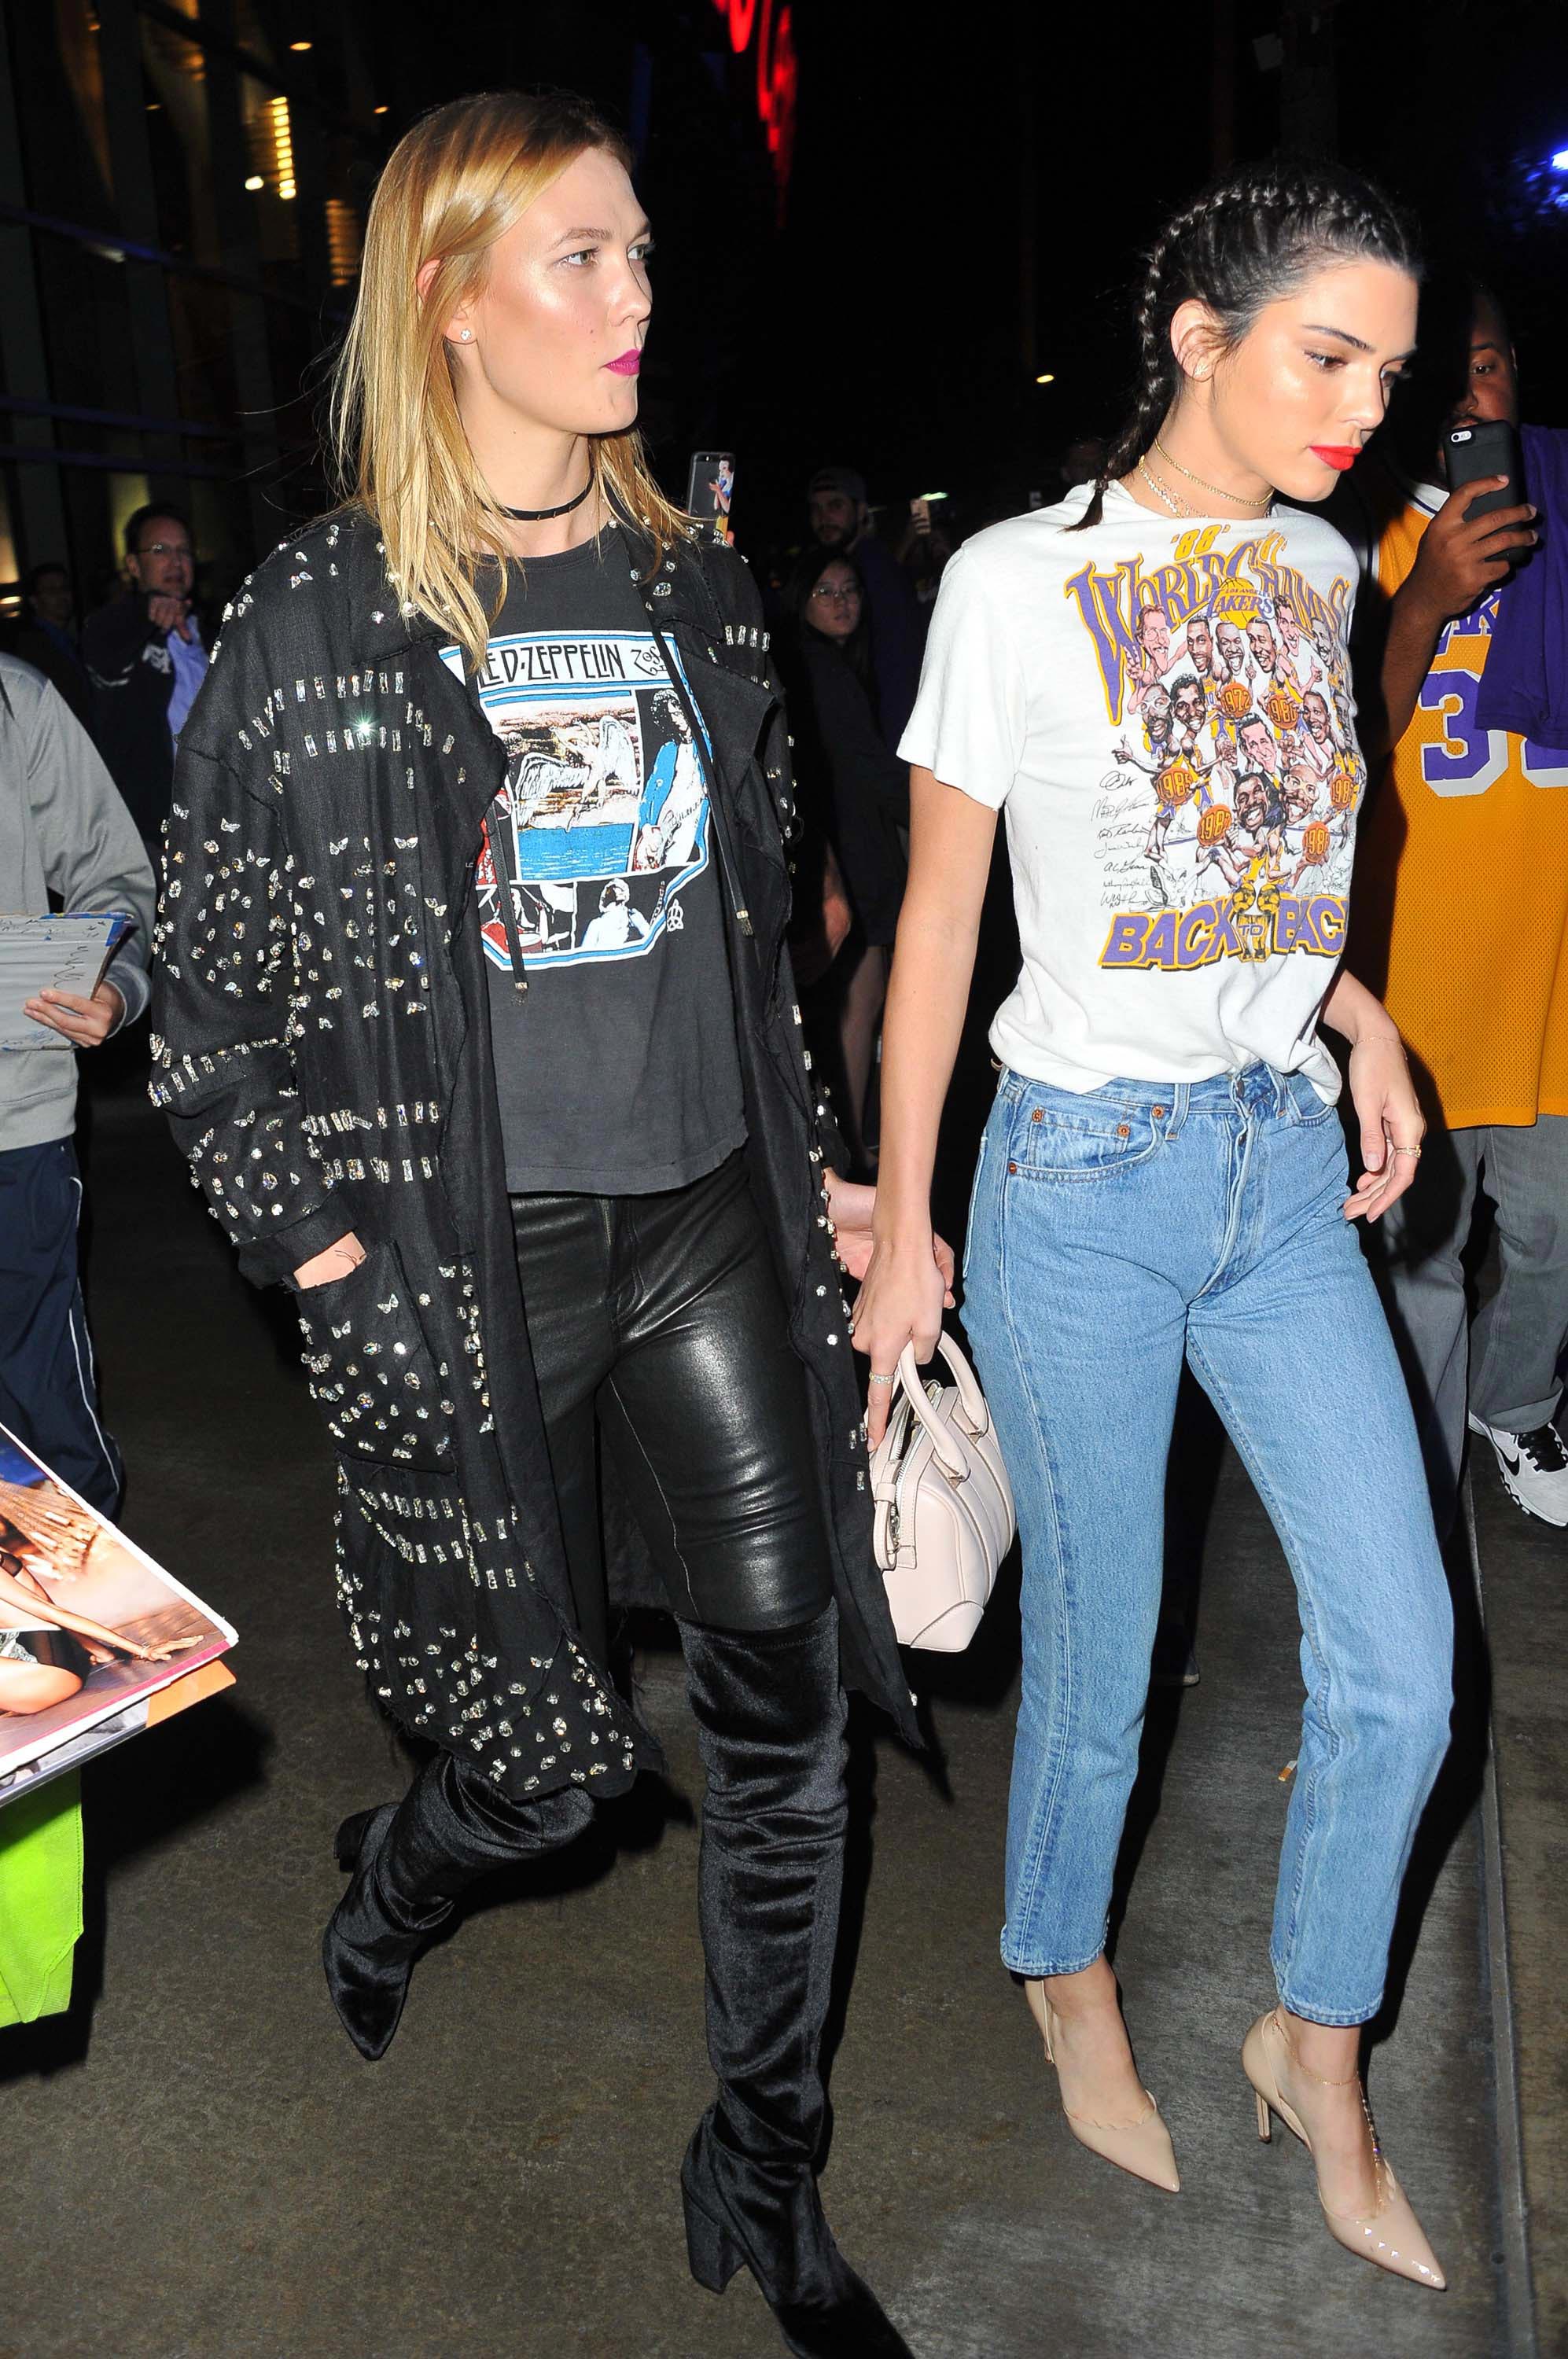 Karlie Kloss attends a Los Angeles Lakers game